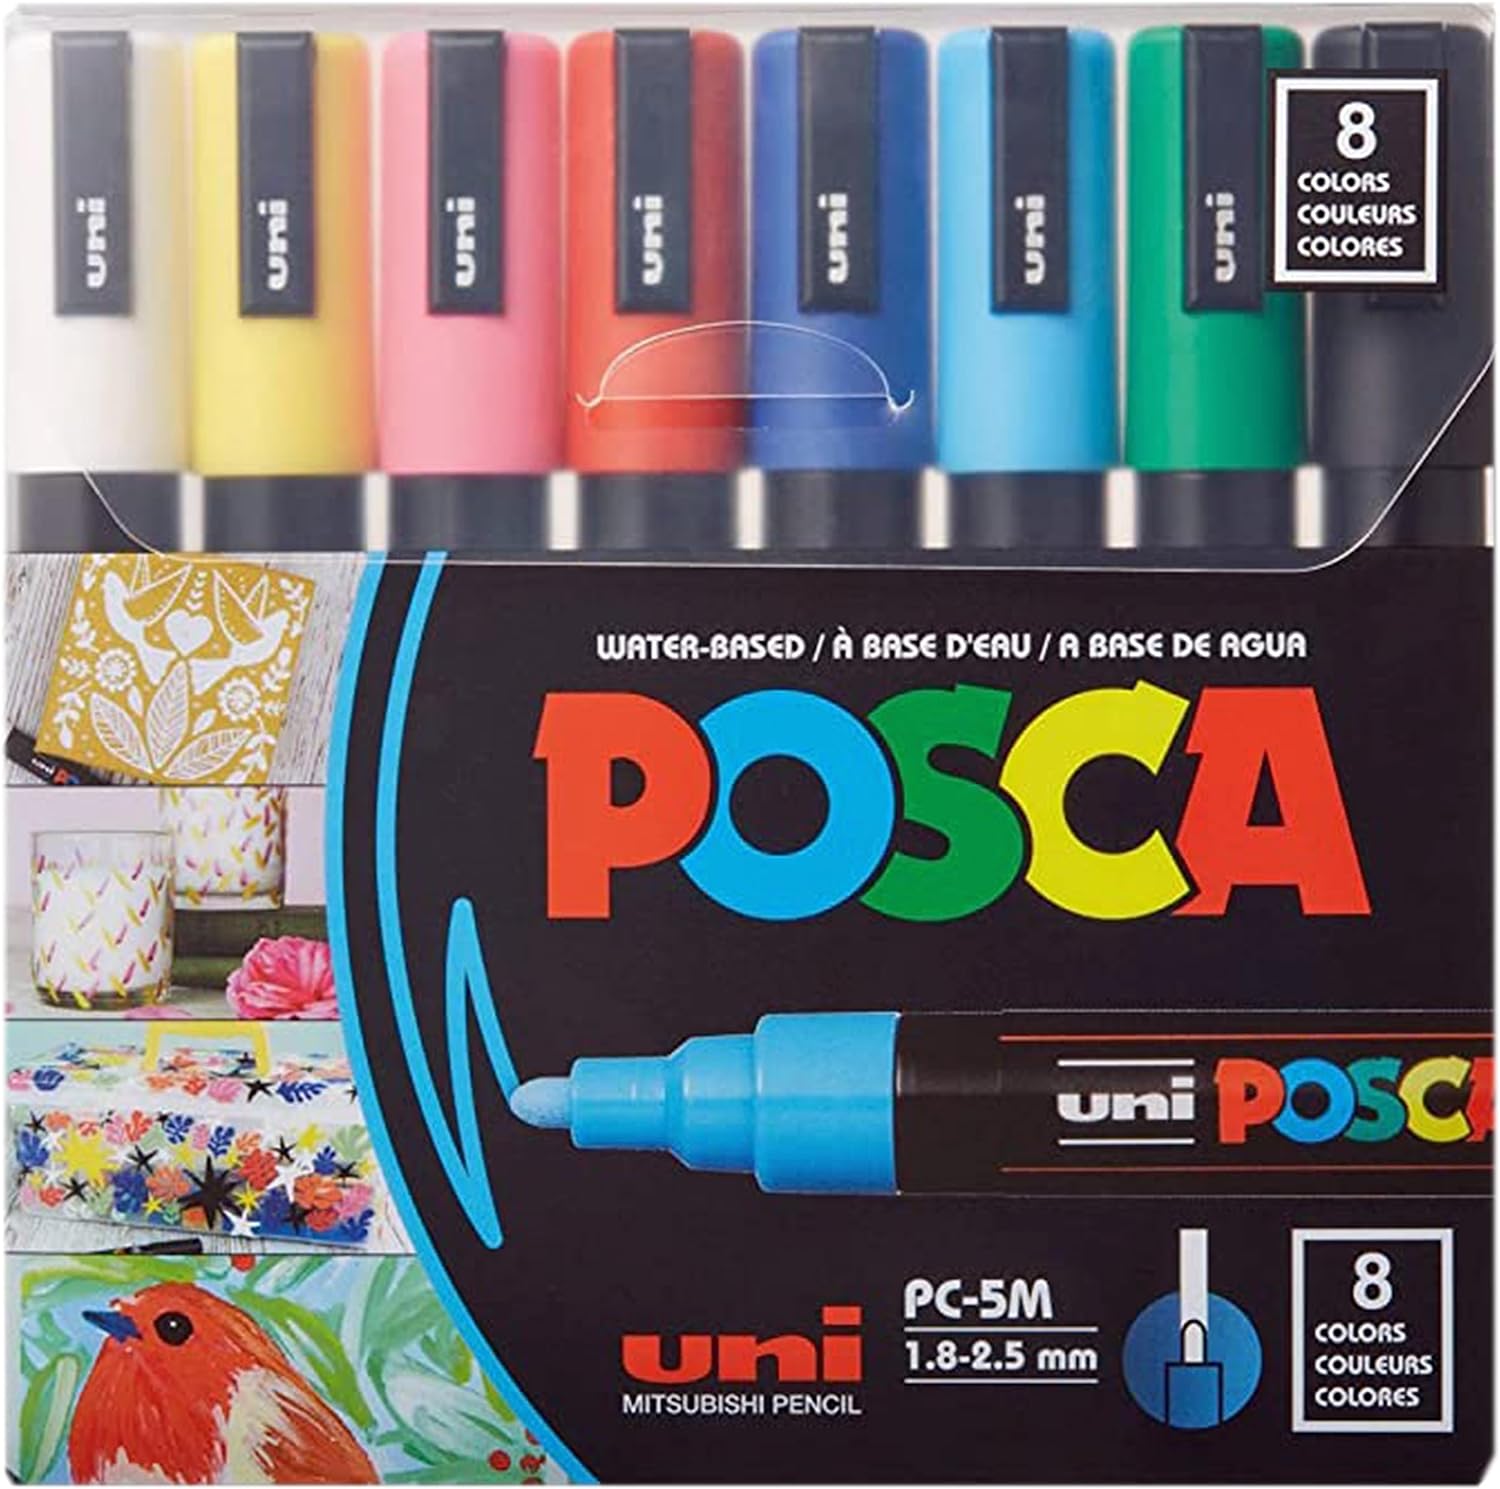 8 Posca Paint Markers, 5M Medium Markers with Reversibl